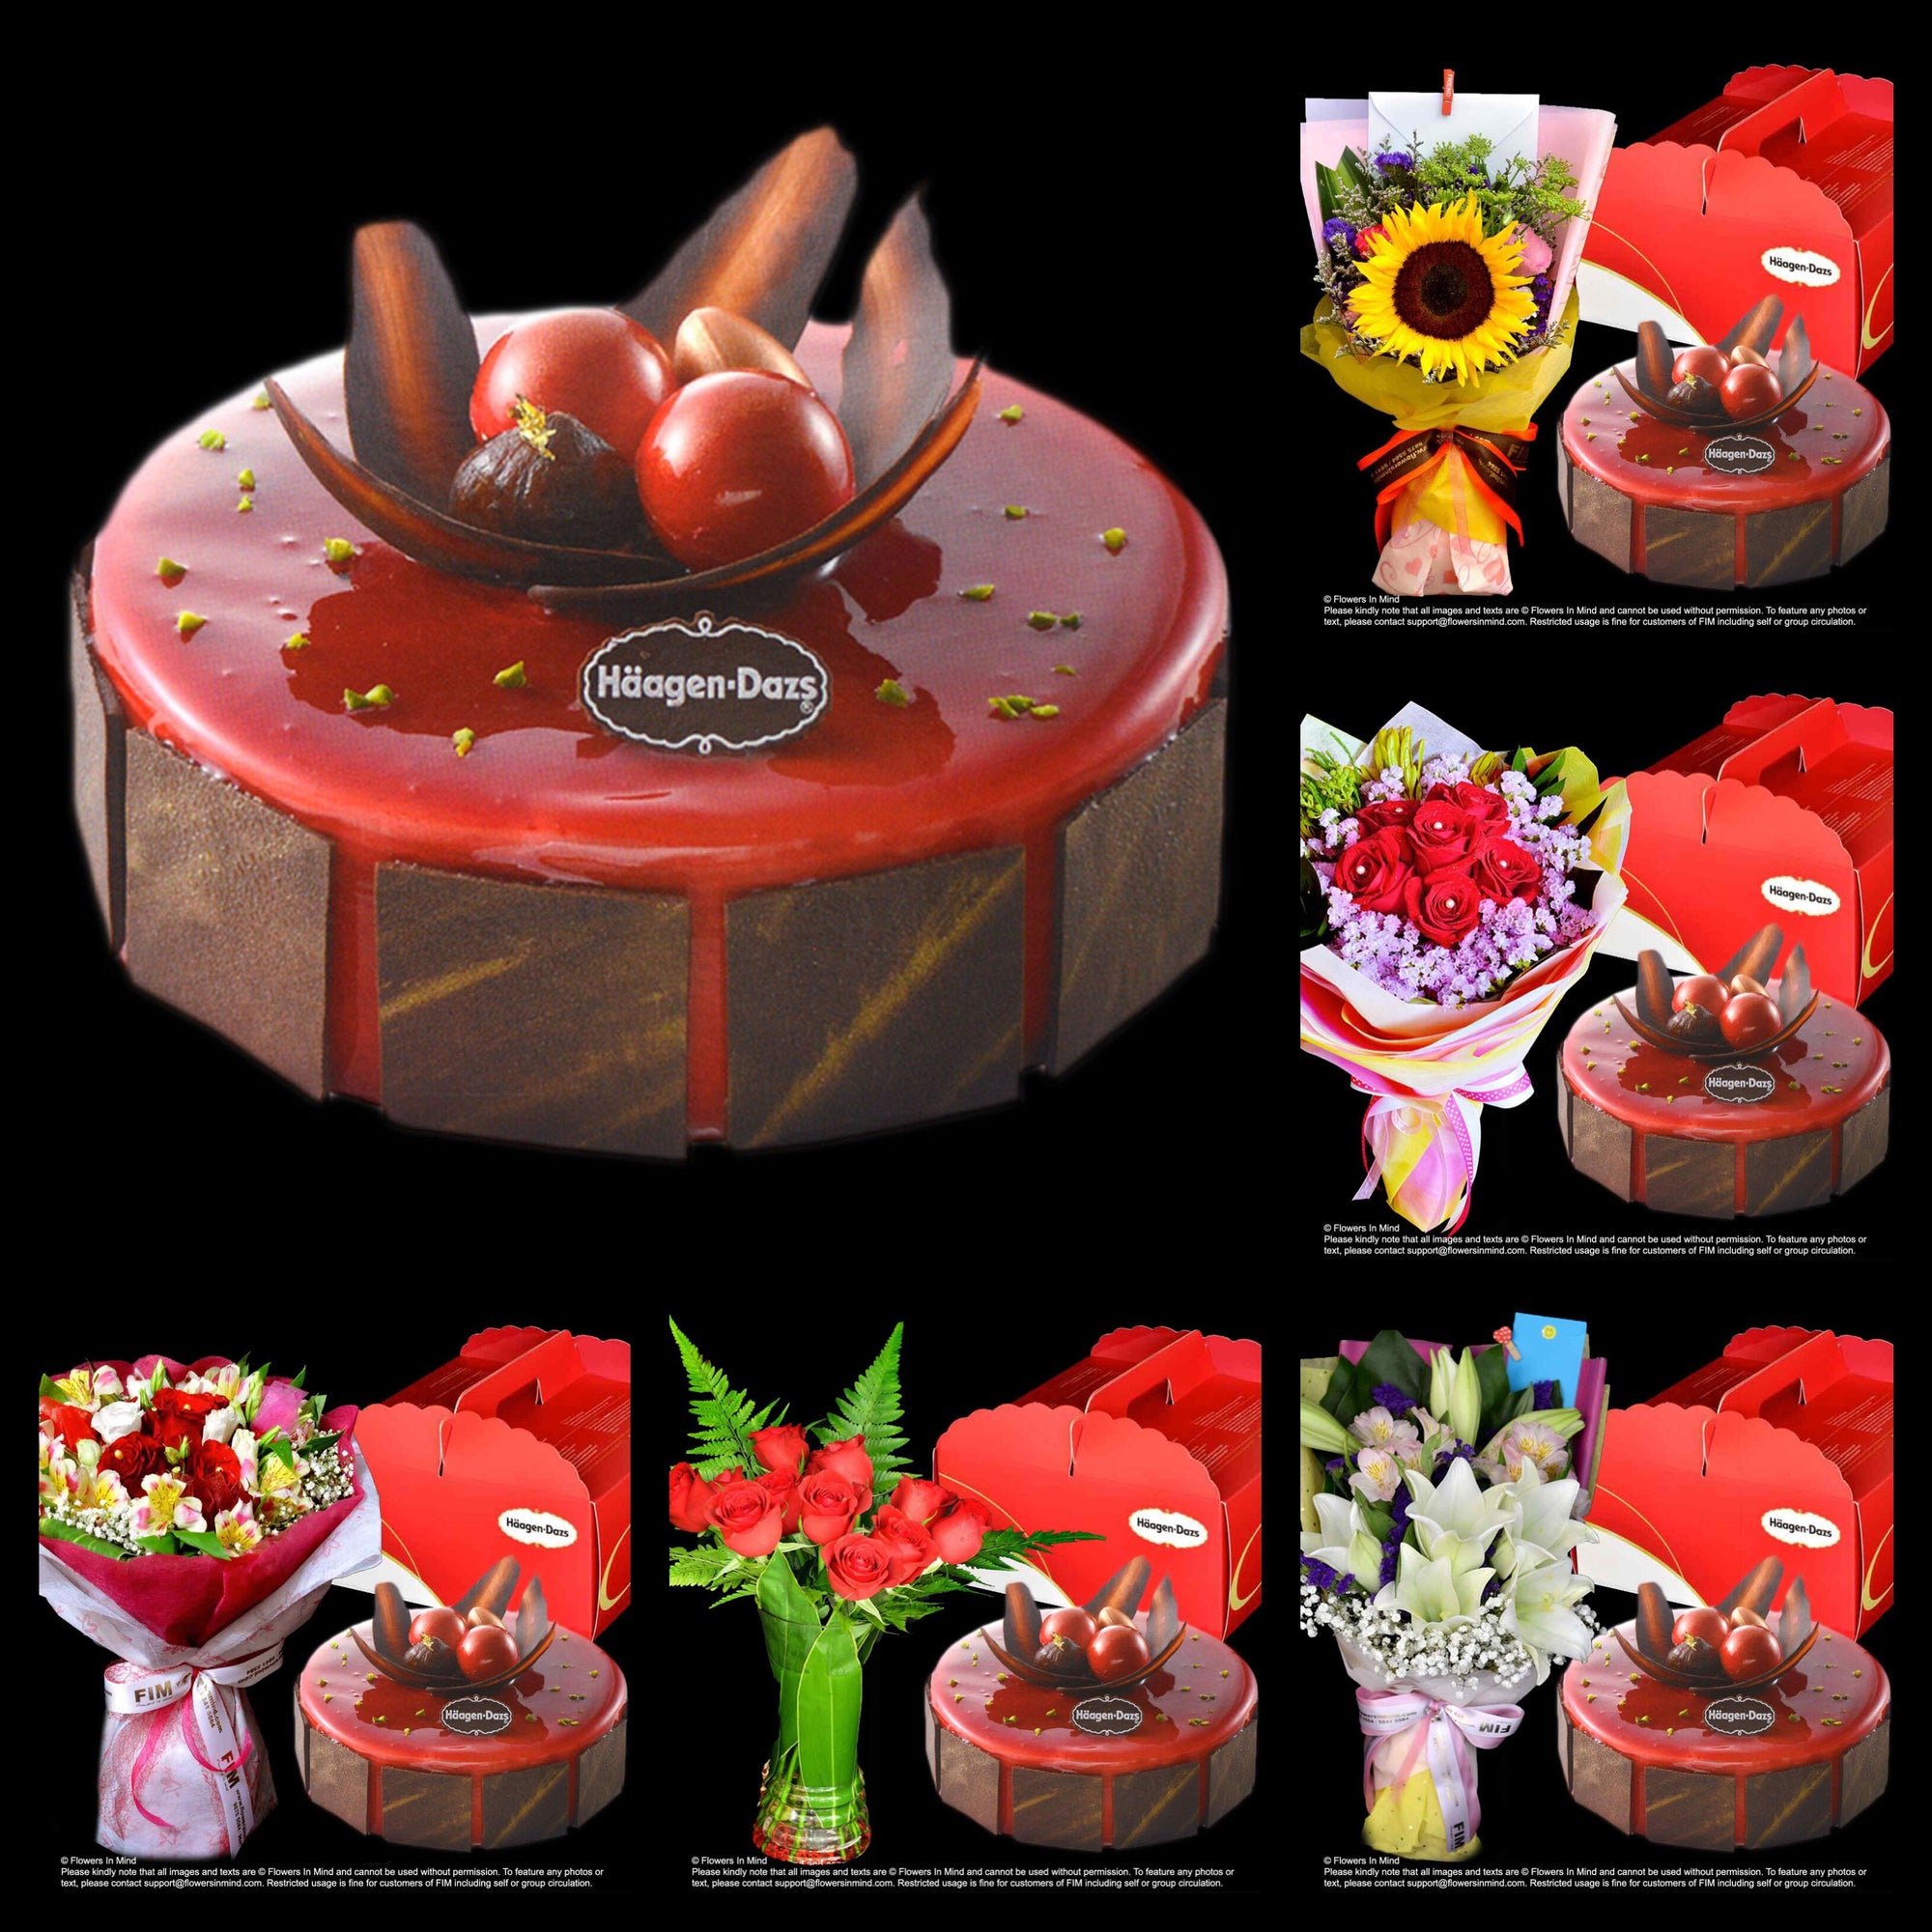 ICE CREAM CAKE LOVE MOMENT from Haagen Dazs with flowers delivery ...